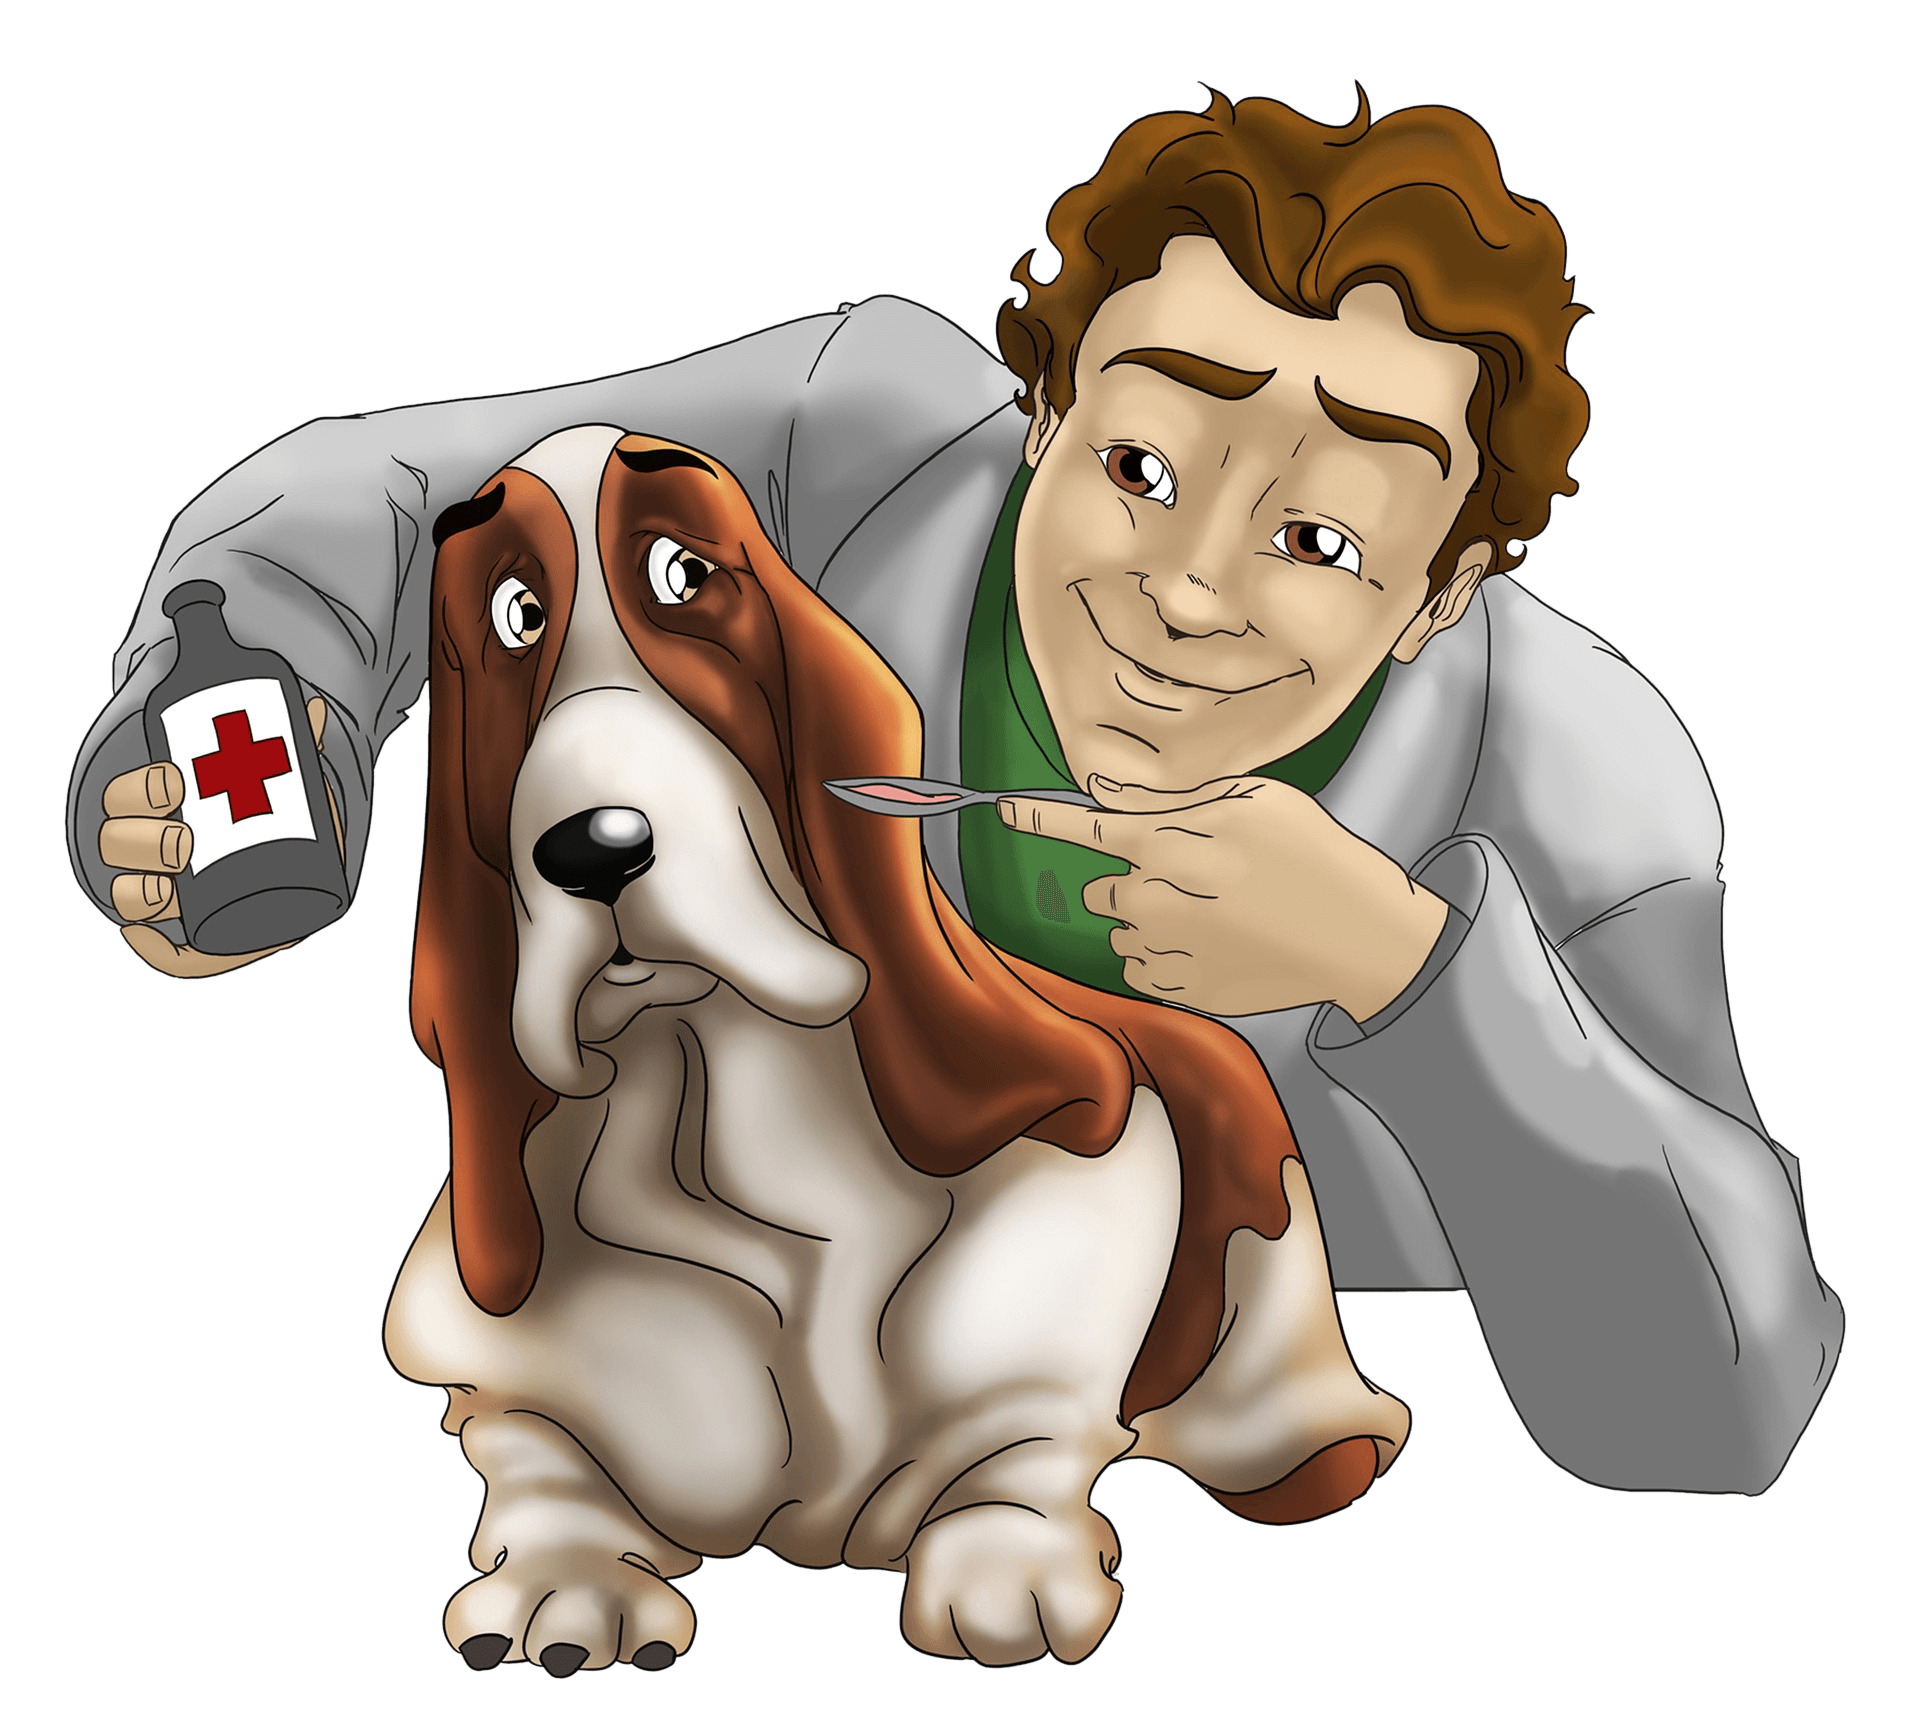 Clip Arts Related To : black and white clipart vet. view all Veterinarian C...